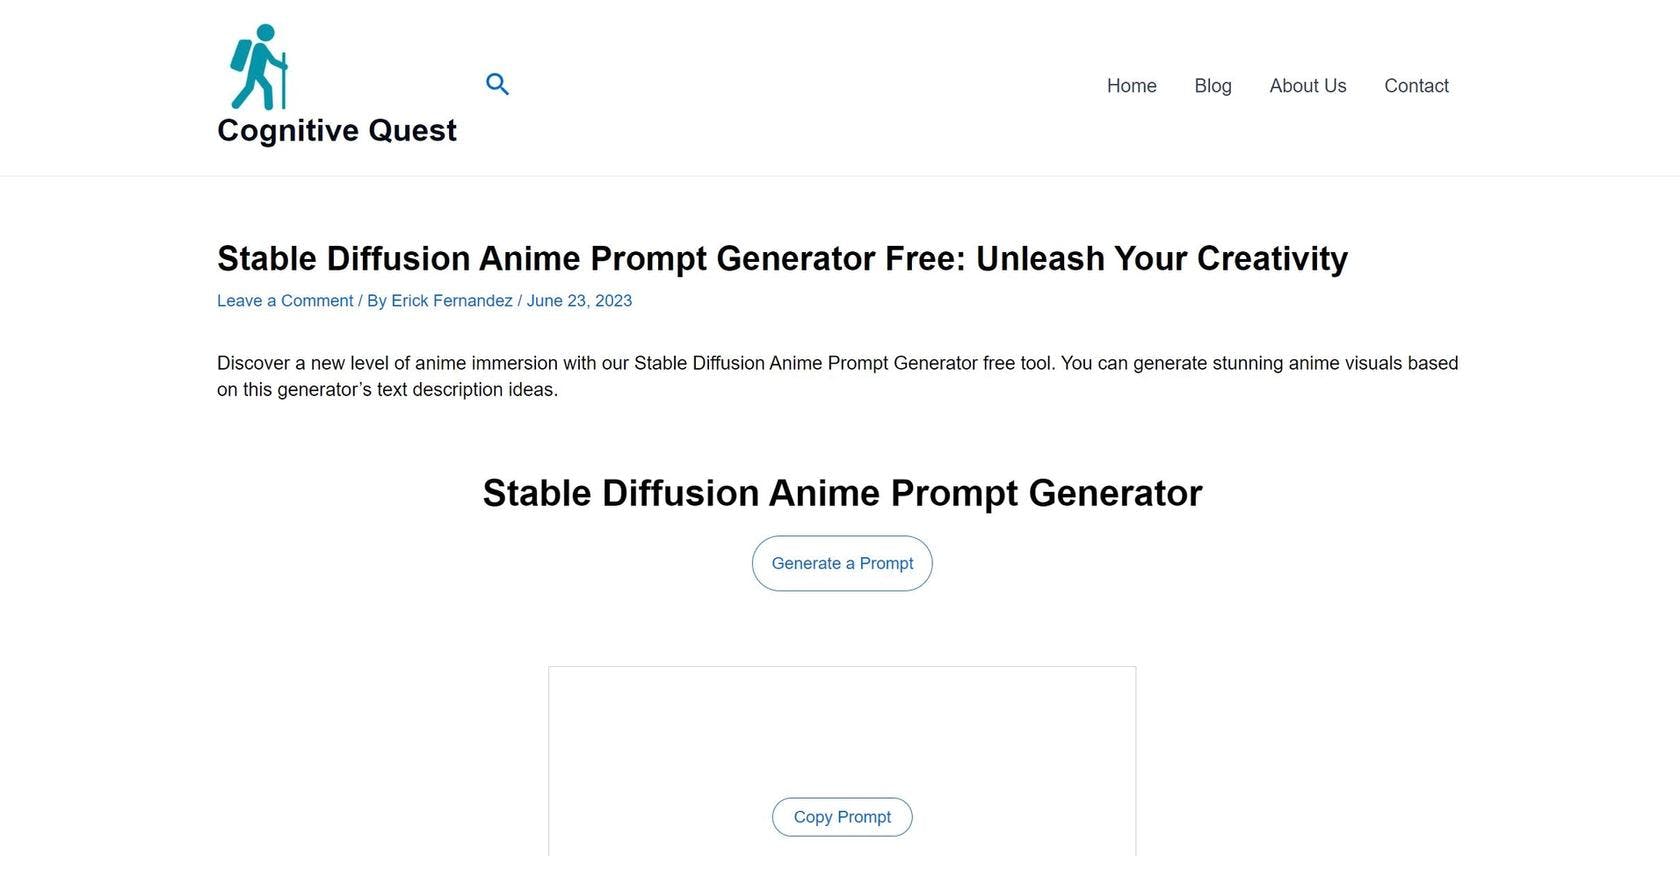 Stable Diffussion Anime Prompter